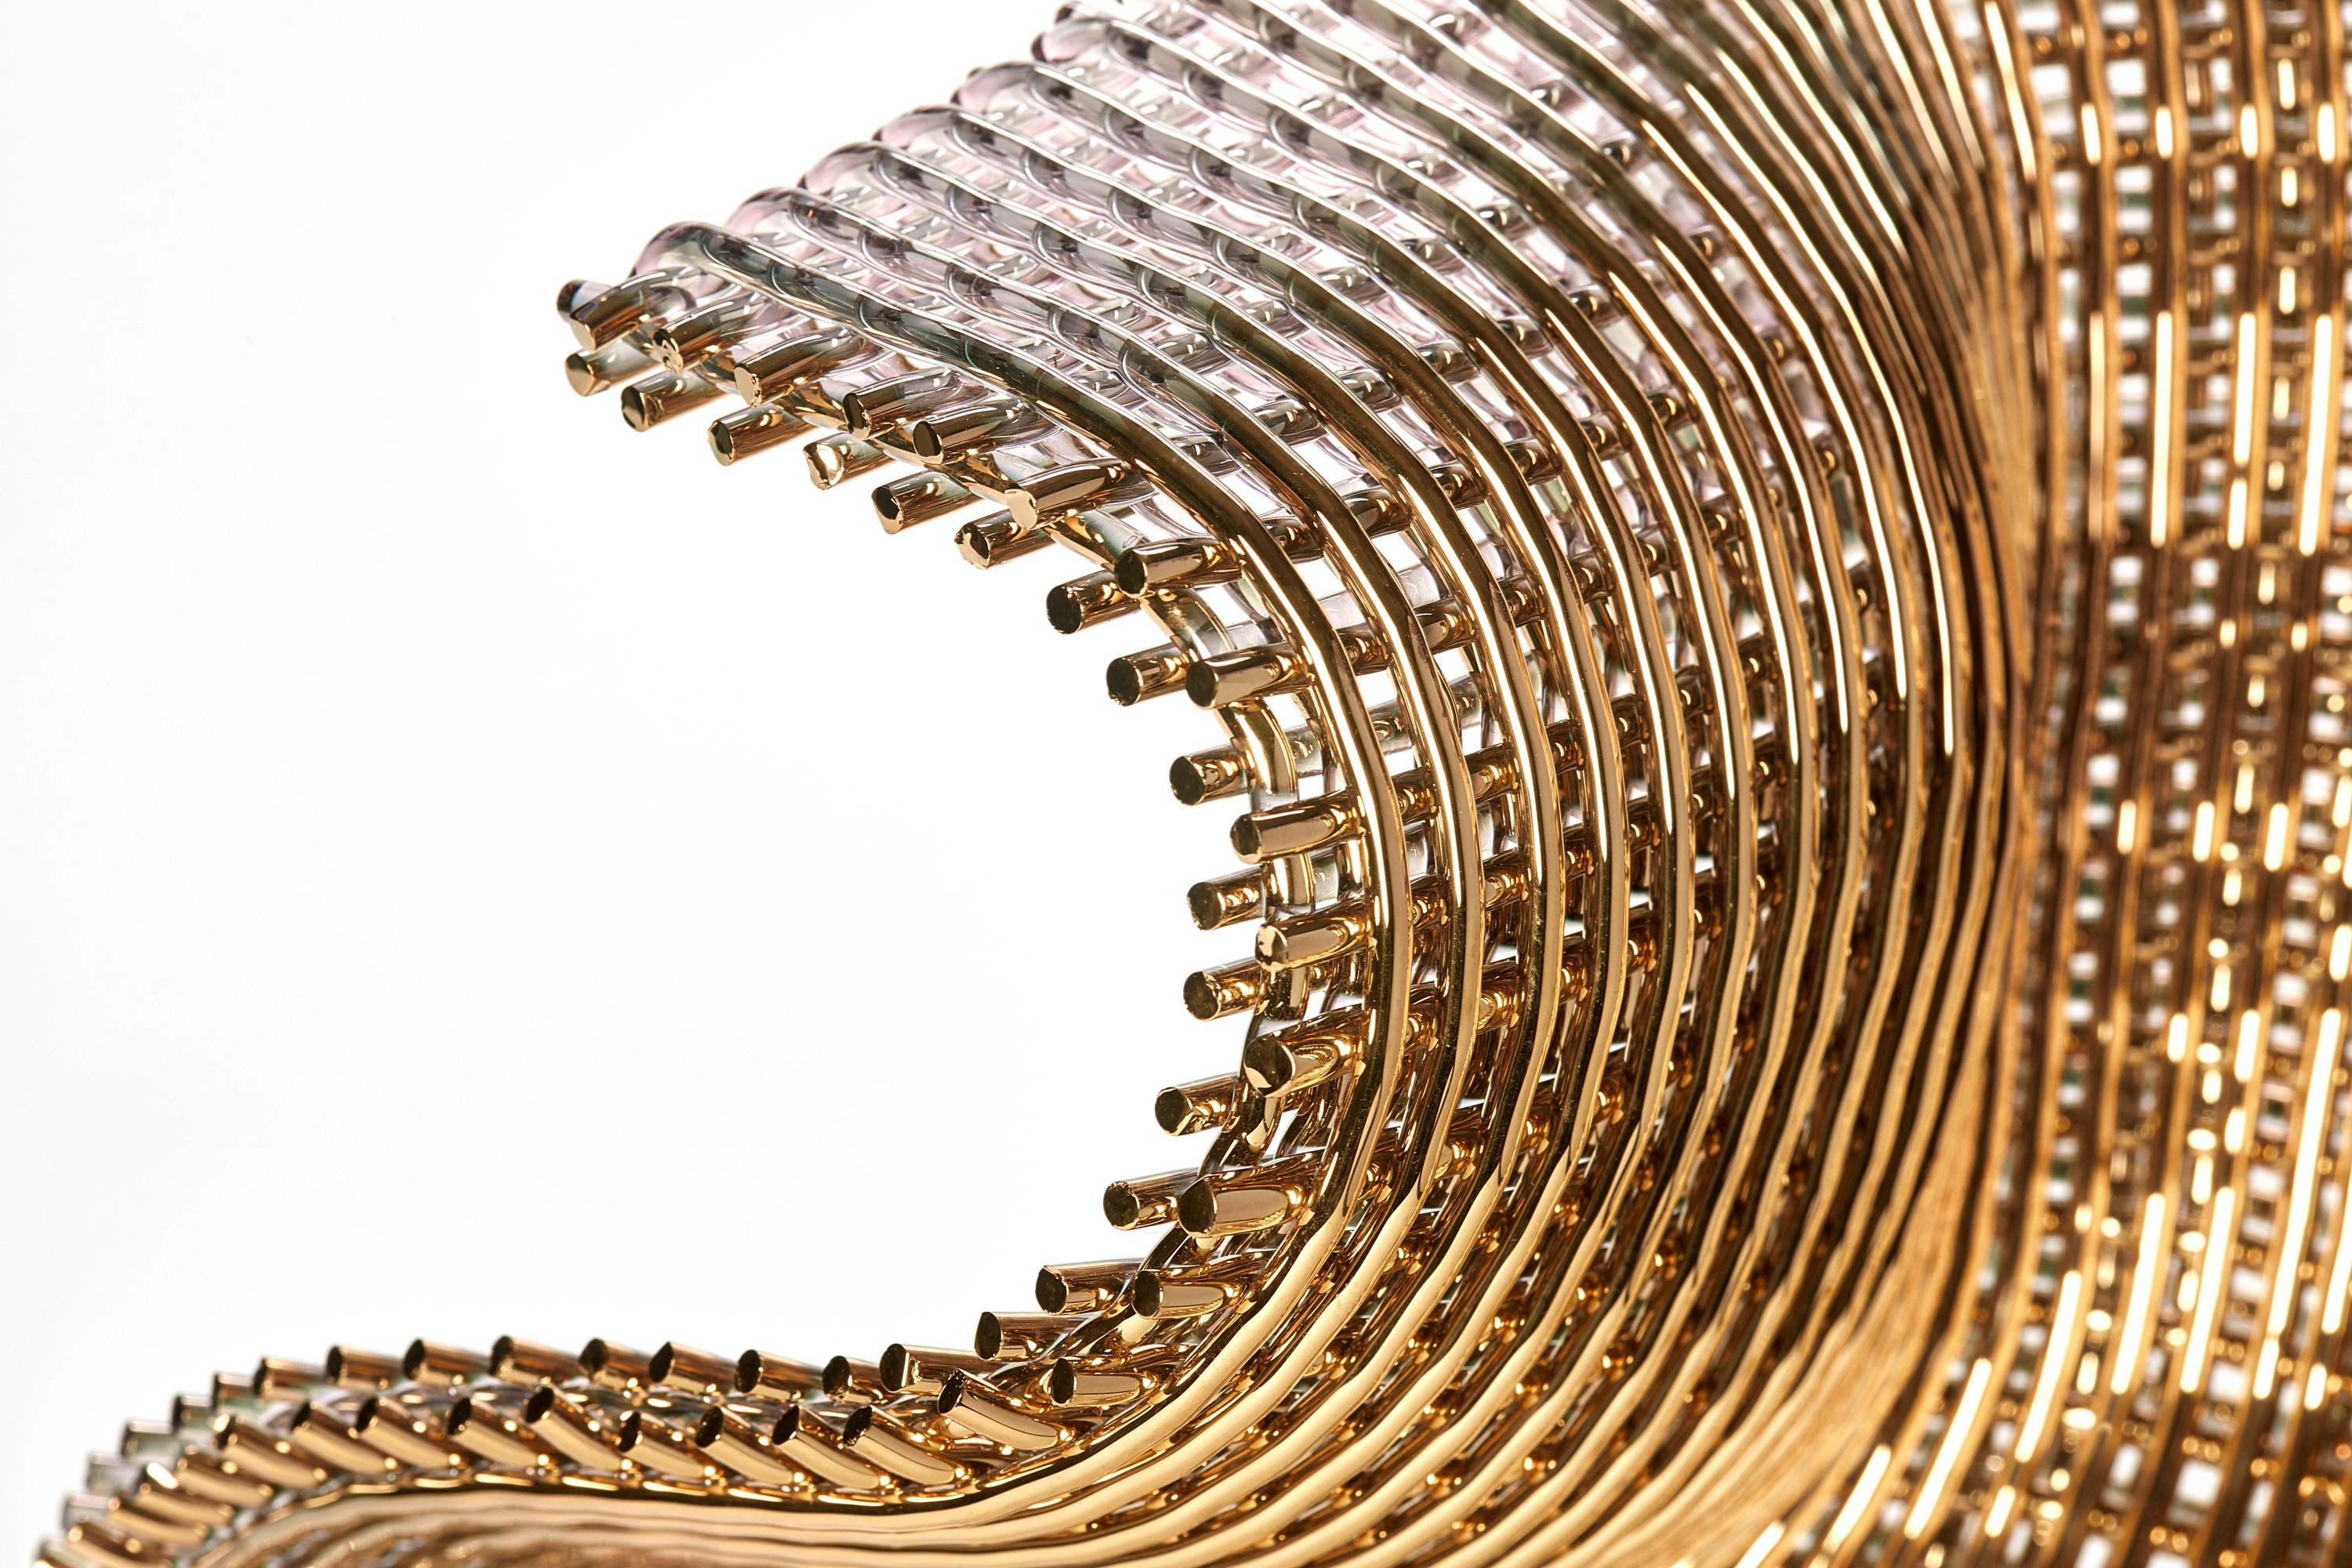 Contemporary Masquerade, a woven gold & glass standing abstract sculpture by Cathryn Shilling